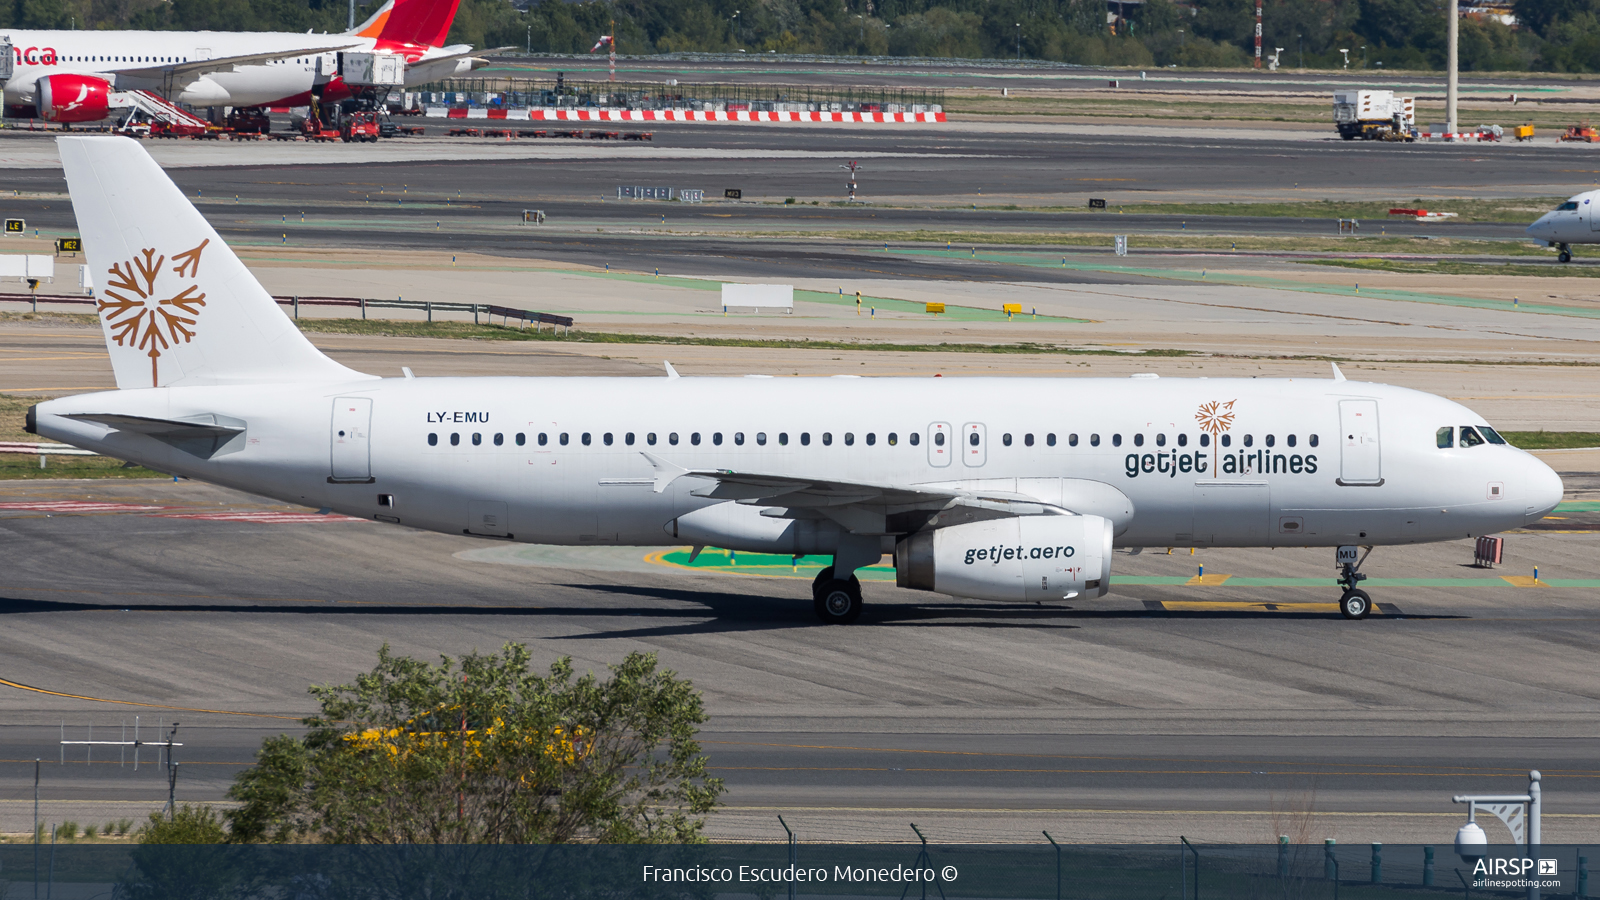 Getjet Airlines  Airbus A320  LY-EMU